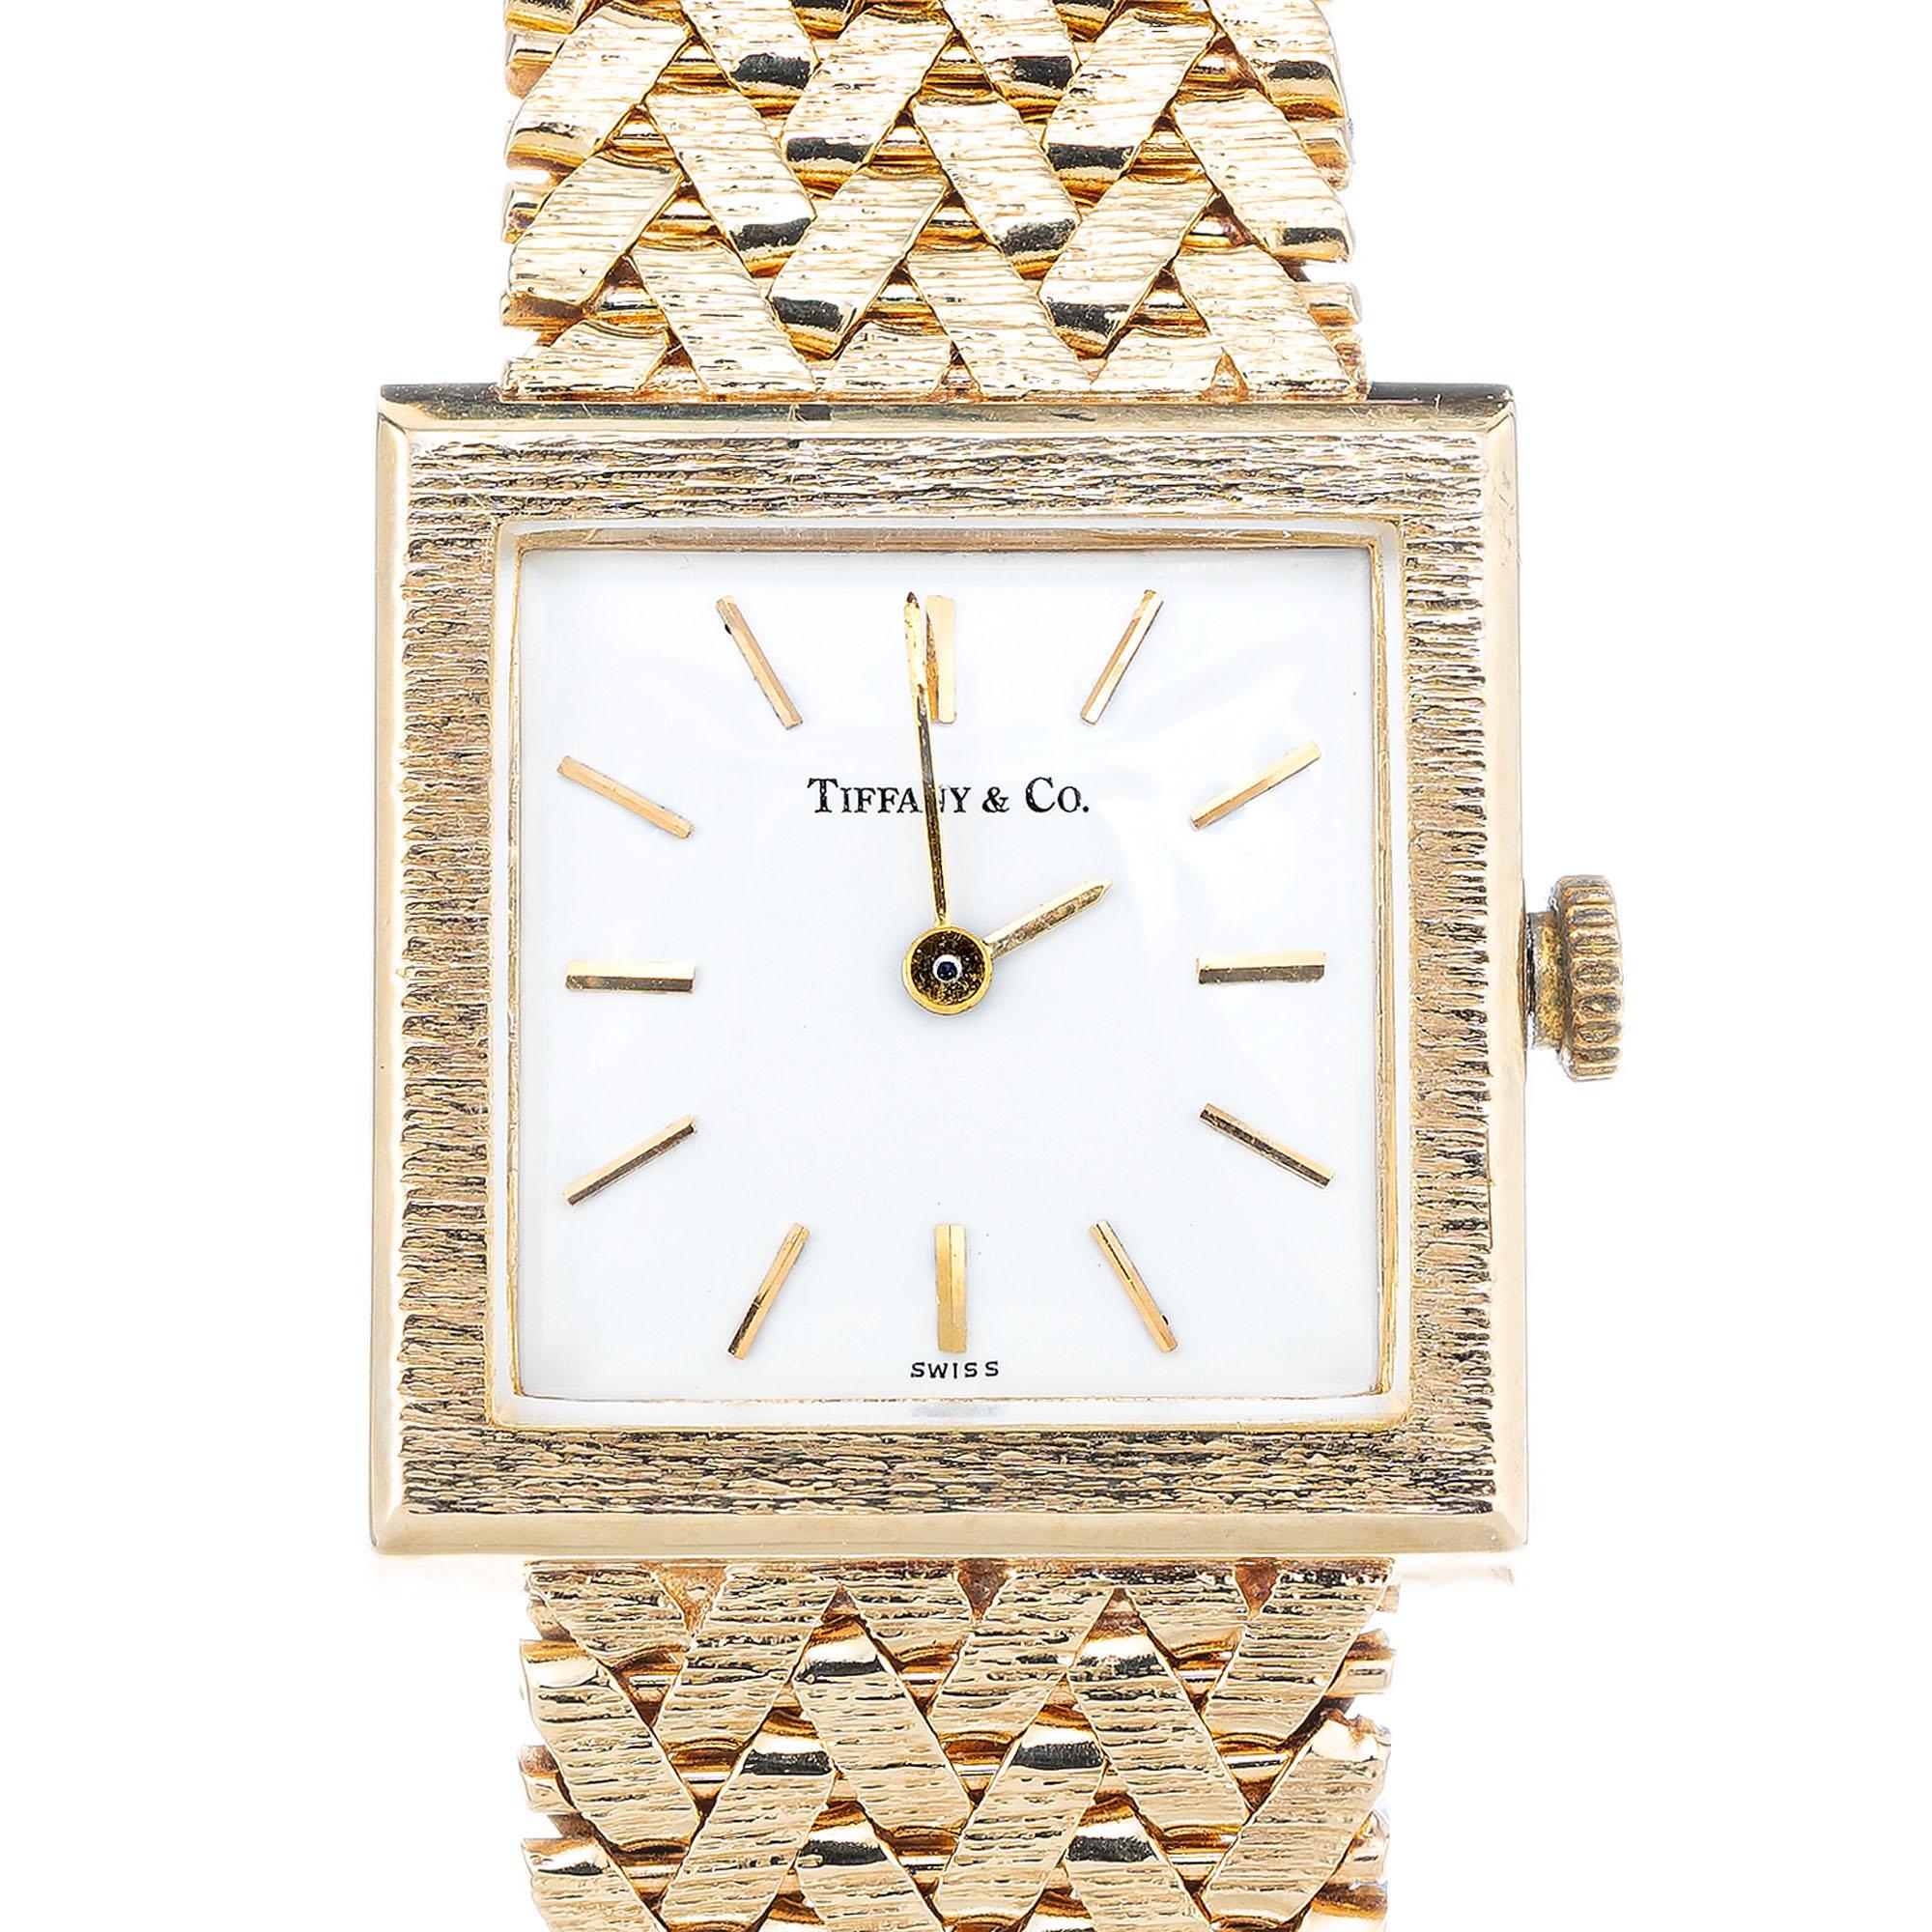 1970’s 14k yellow gold Baume and Mercier 17 jewel watch with mesh gold band retailed by Tiffany & Co. A jeweler can shorten the band or make it longer with a ladder style extension at the end. Fits a 7-7.25 Inch wrist

Length: 25.65mm
Width: